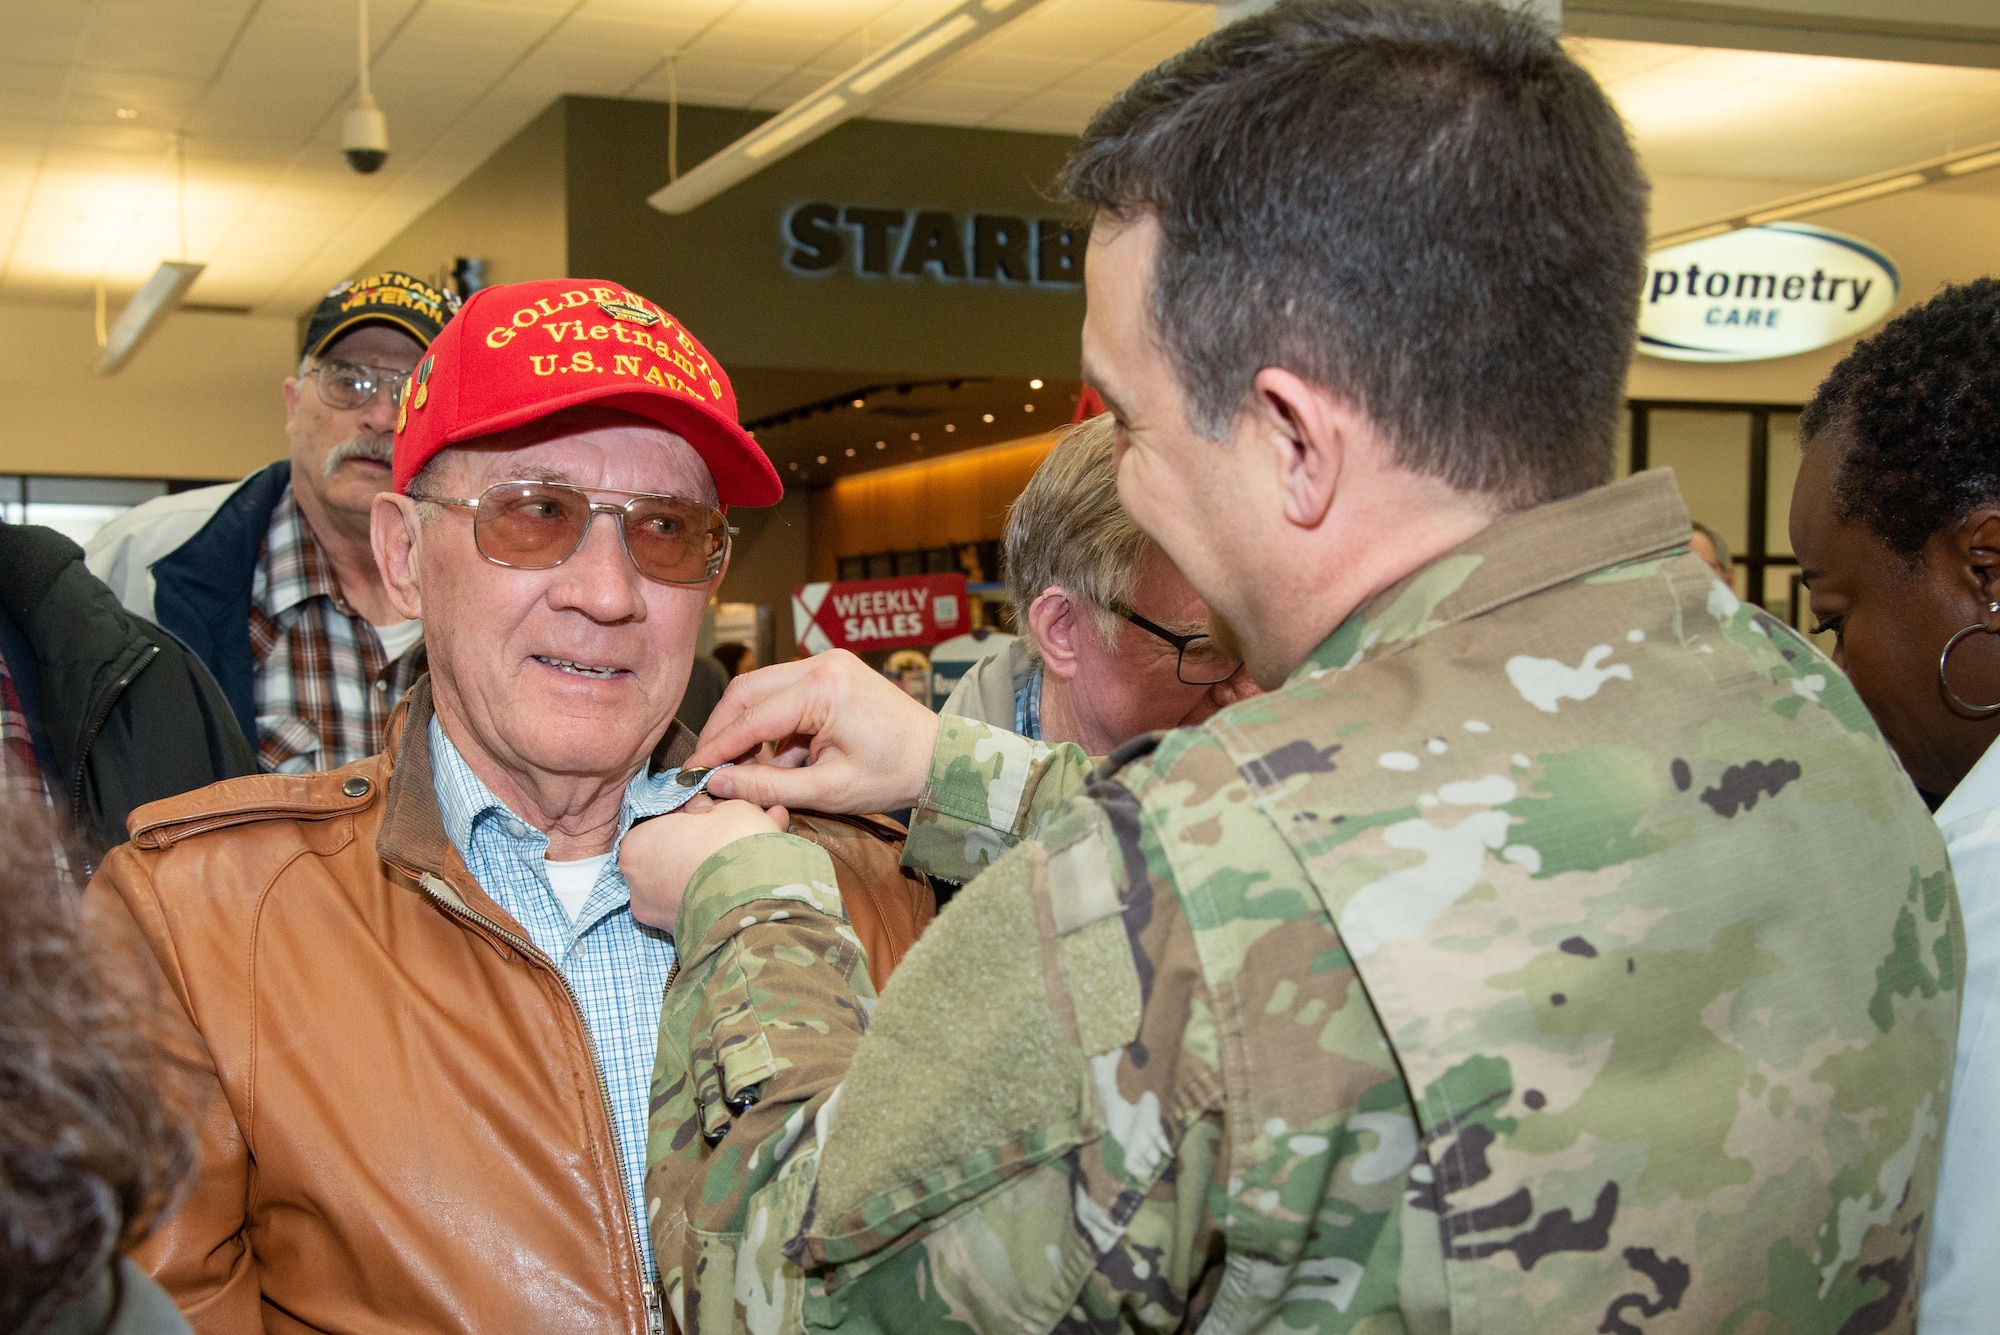 Col. Gabe Lopez, 75th Mission Support Group commander, pins Bill Kelley, U.S. Navy Veteran, with a Vietnam Veteran Pin March 29, 2019, at the Main Exchange at Hill Air Force Base, Utah. Base Exchanges around the world hosted pinning ceremonies to honor Vietnam veterans on Vietnam Veterans day. Vietnam Veterans Day is celebrated every March 29 to honor the courage and sacrifice of those who served in the Vietnam War. (U.S. Air Force photo by Cynthia Griggs)